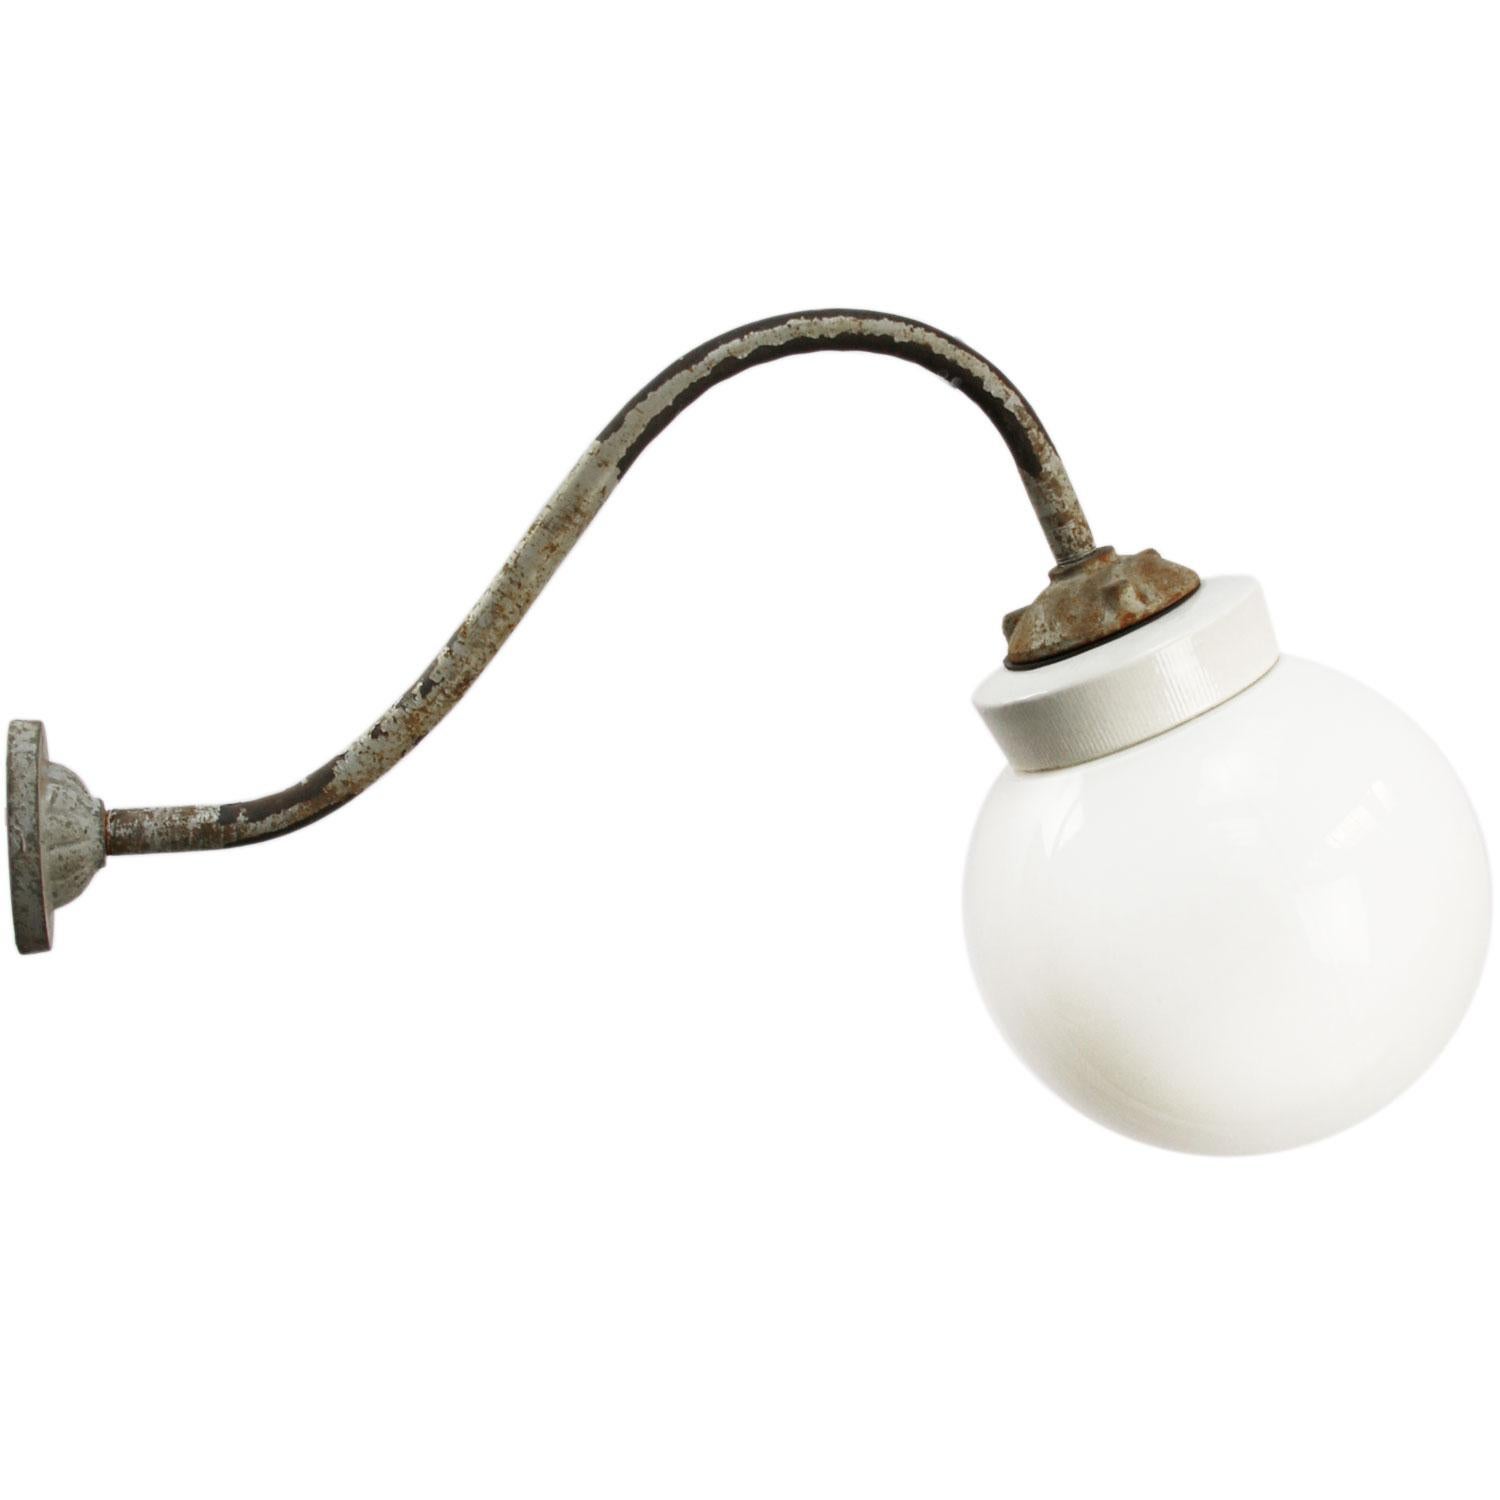 Industrial wall light .
Cast iron and porcelain top, white opaline glass.
Diameter cast iron wall mount: 9 cm, 3 holes to secure.

Weight: 2.00 kg / 4.4 lb

Priced per individual item. All lamps have been made suitable by international standards for